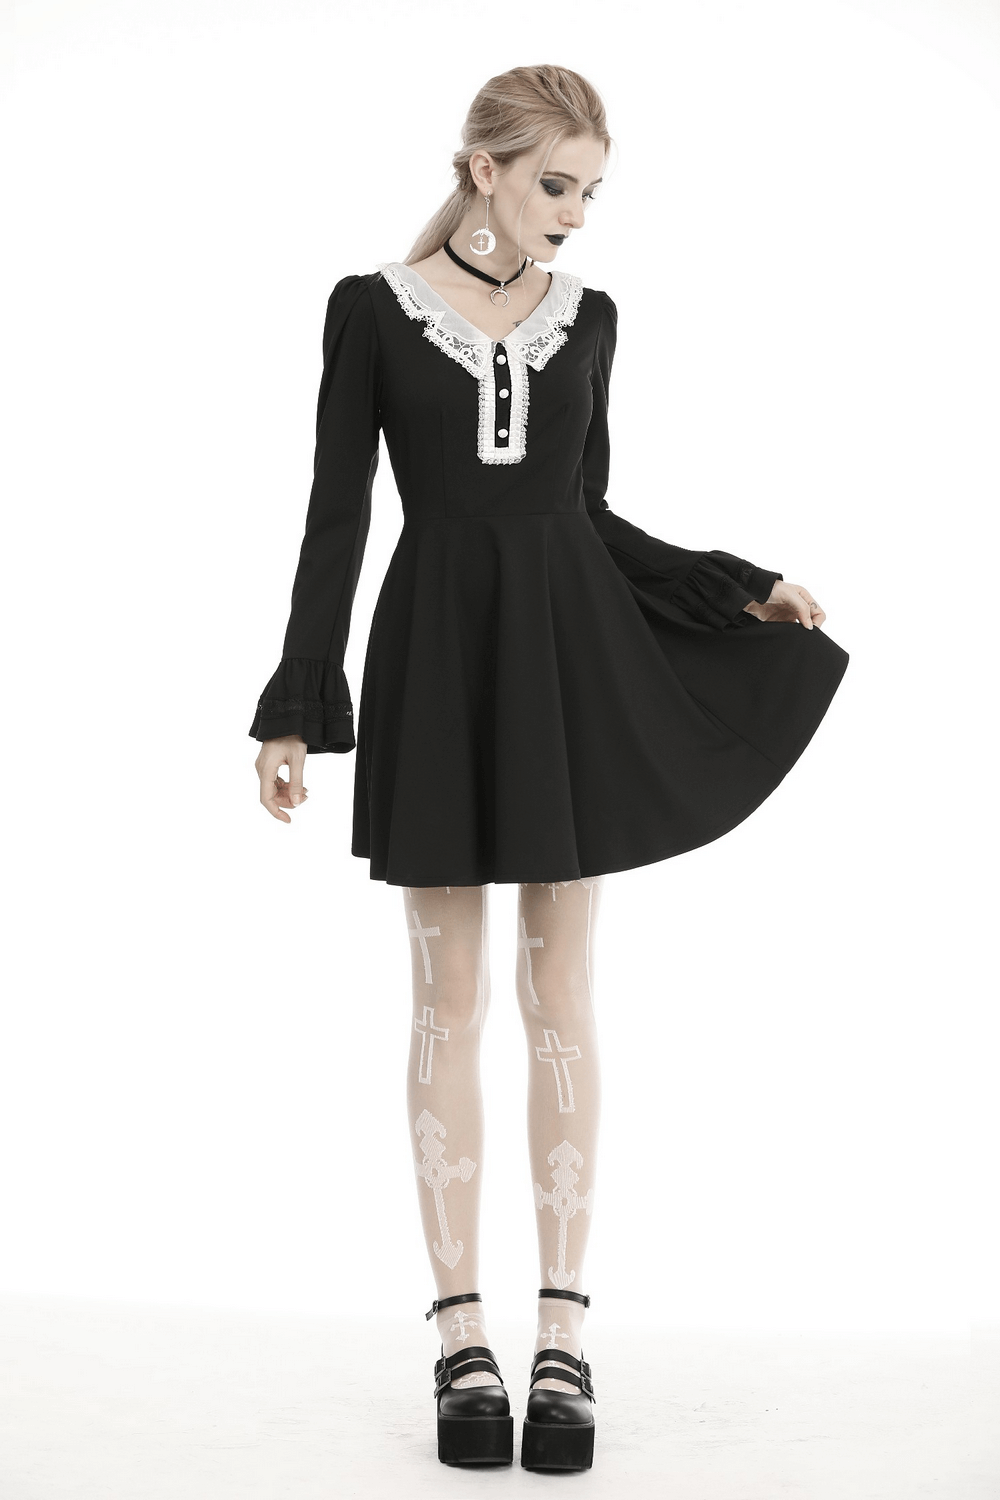 Elegant Black Dress with Lace Collar and Cuff Detail